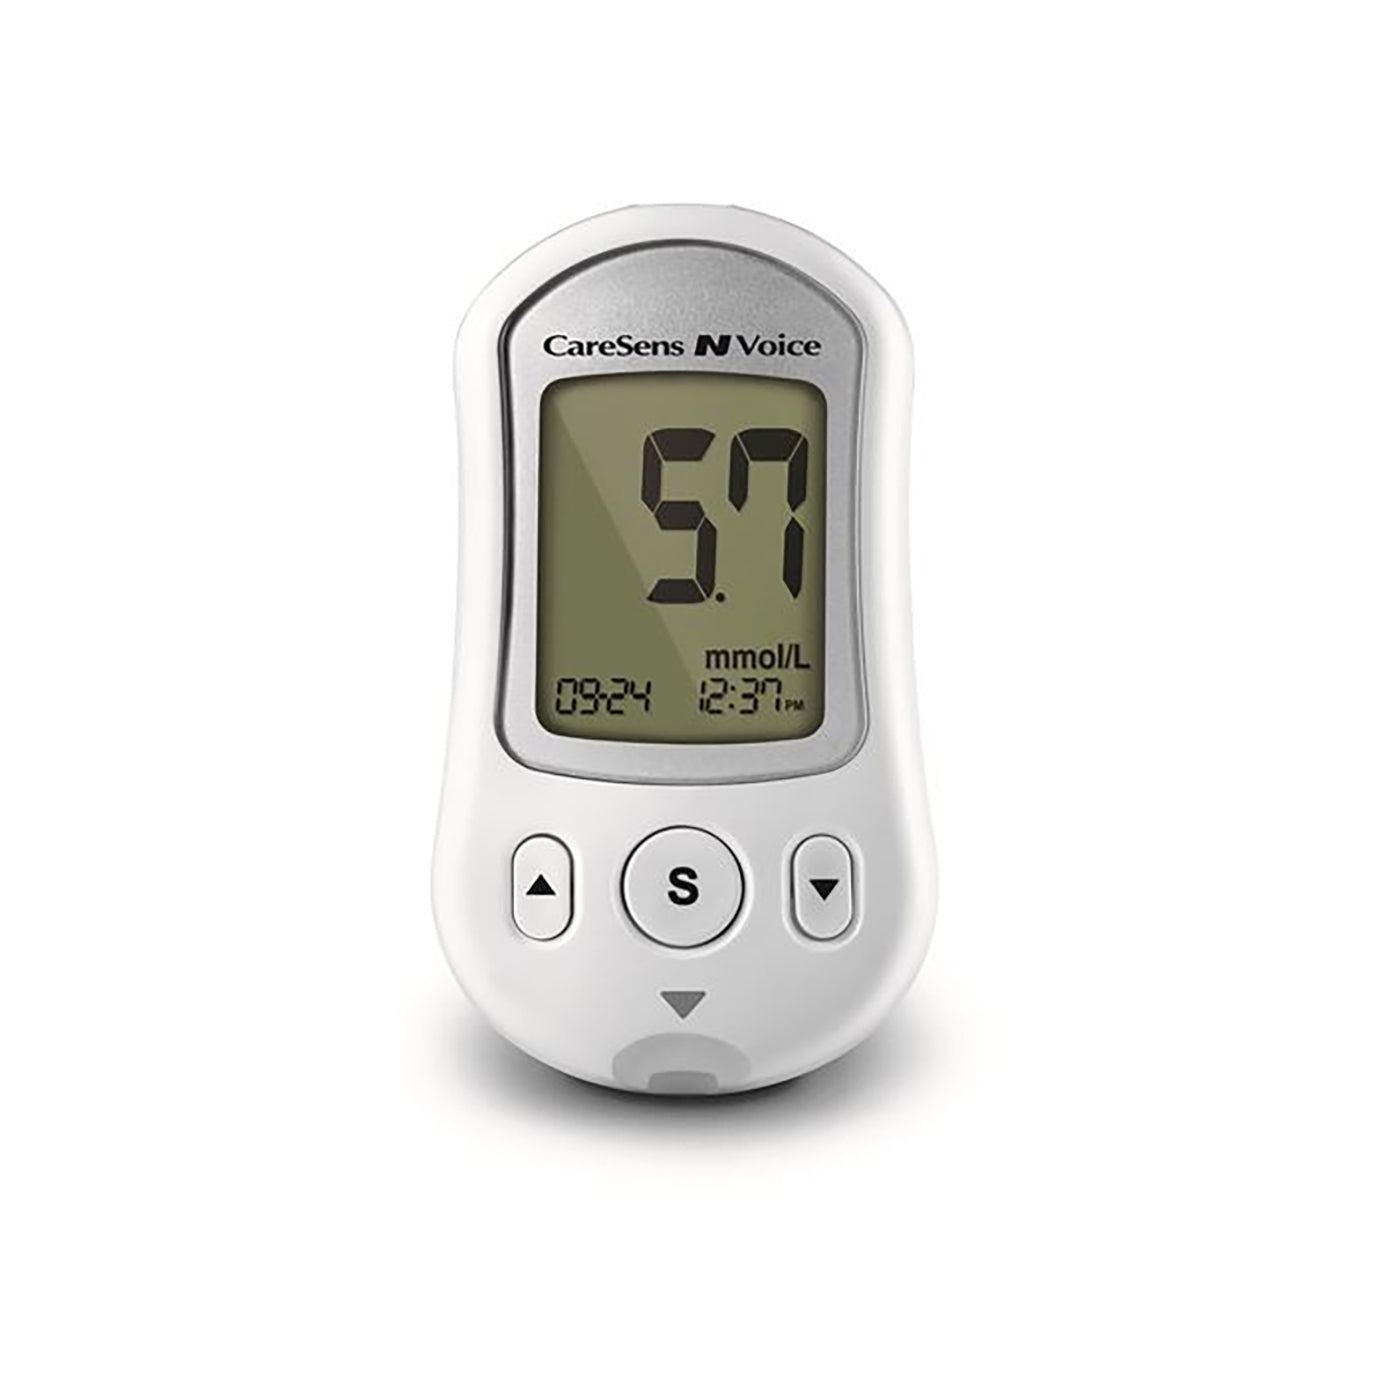 The CareSens N Voice Blood Glucose Monitor